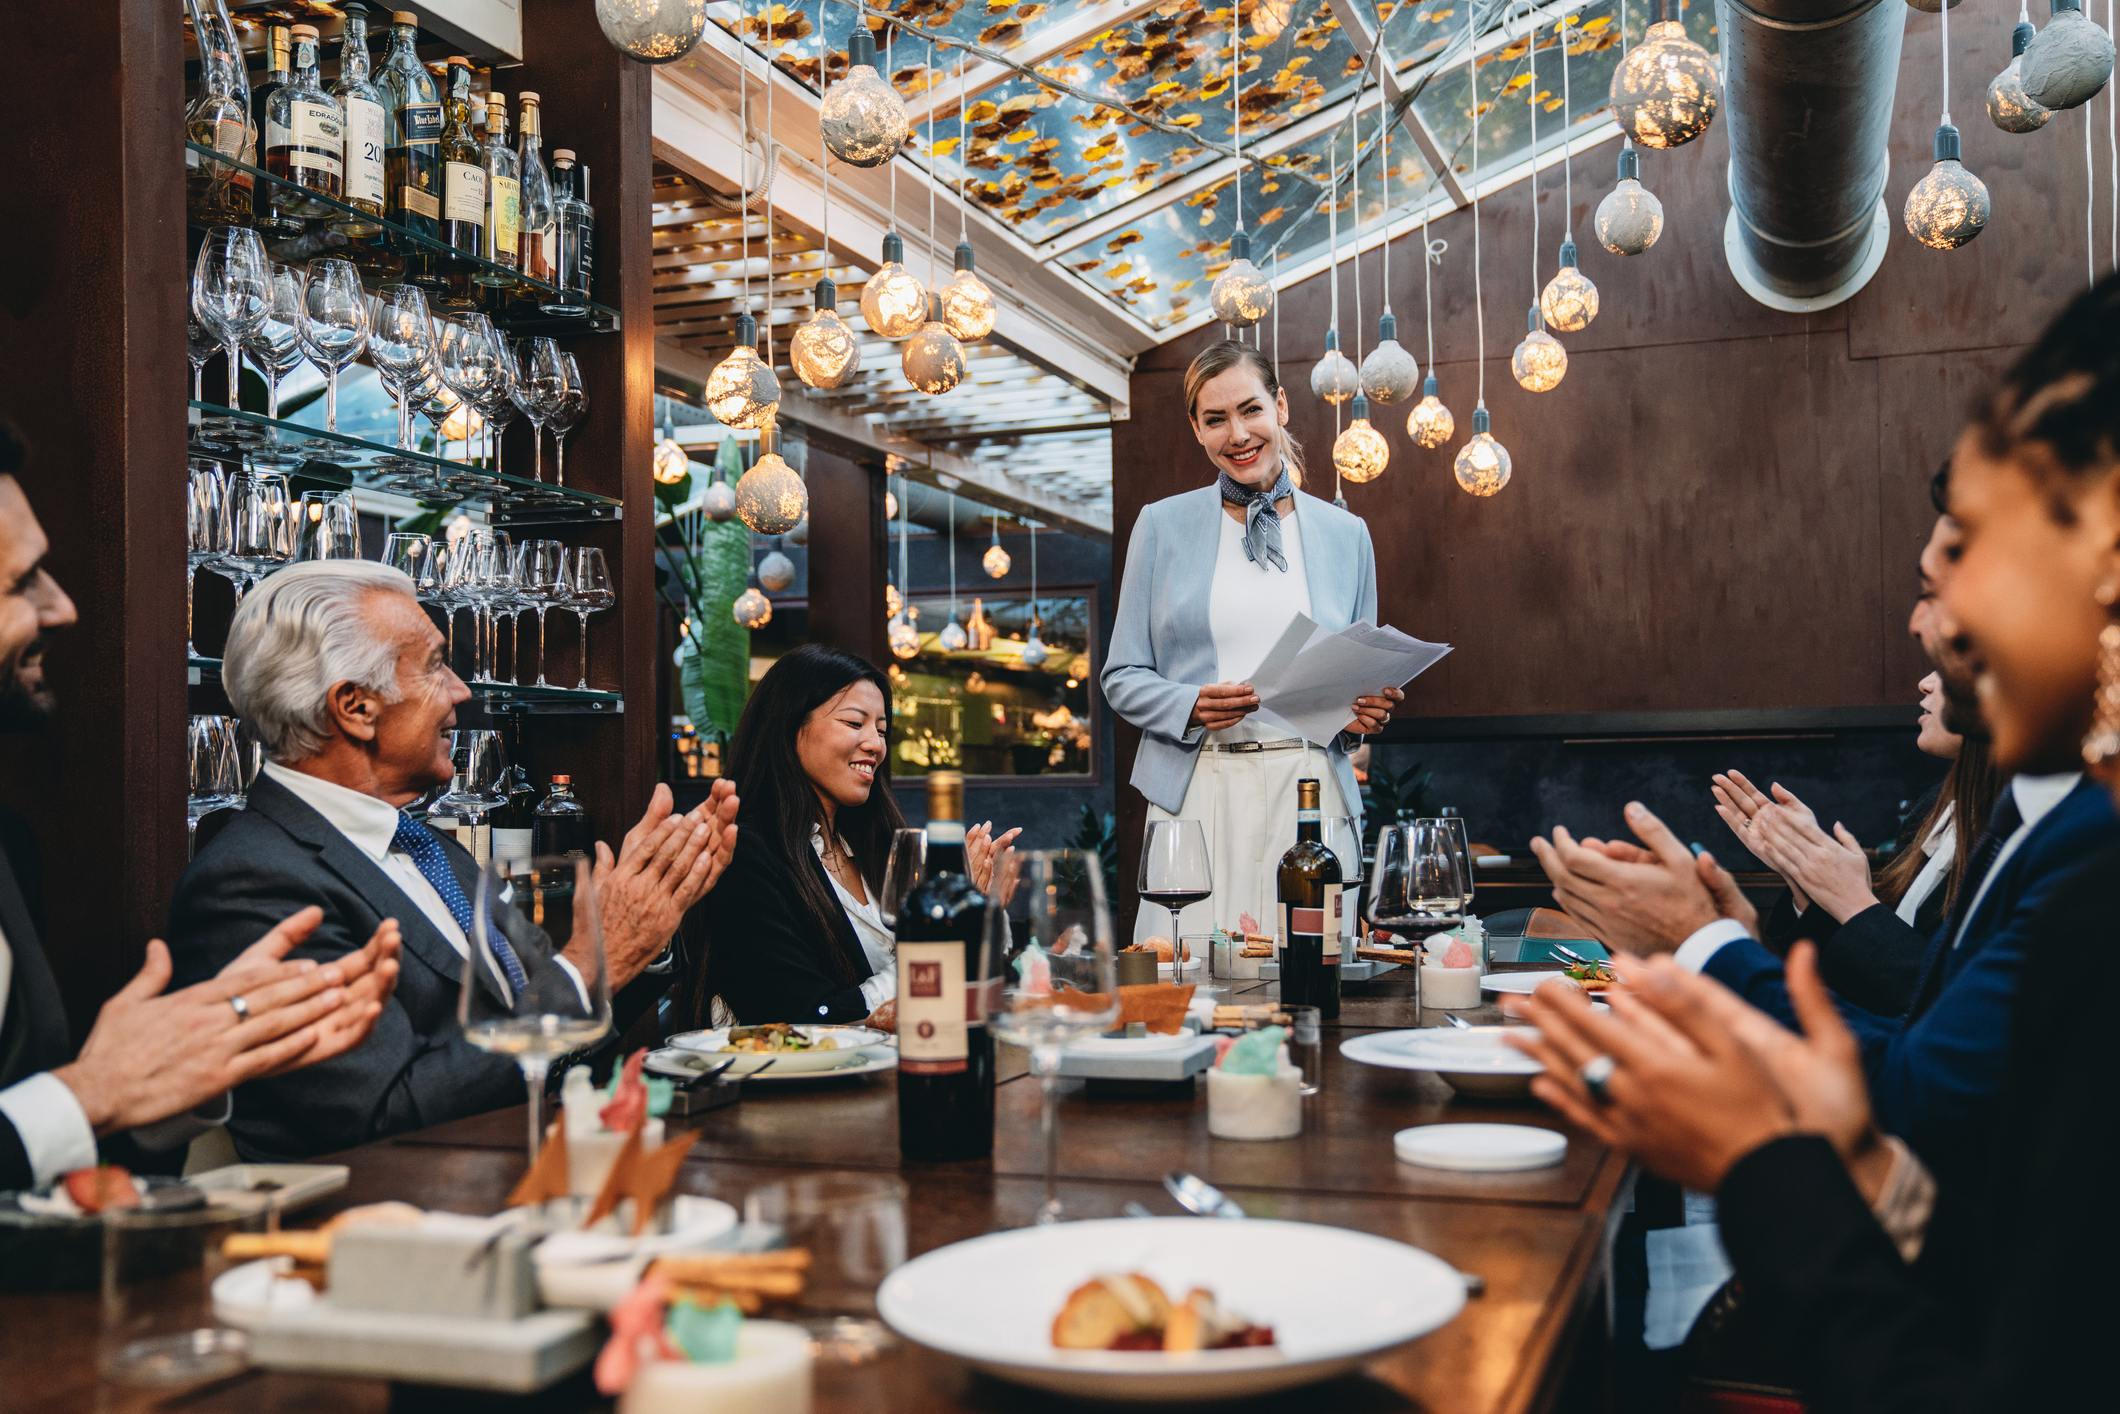 Business meeting at the restaurant. Business people are brainstorming during a strategy presentation in an high-end luxury restaurant.